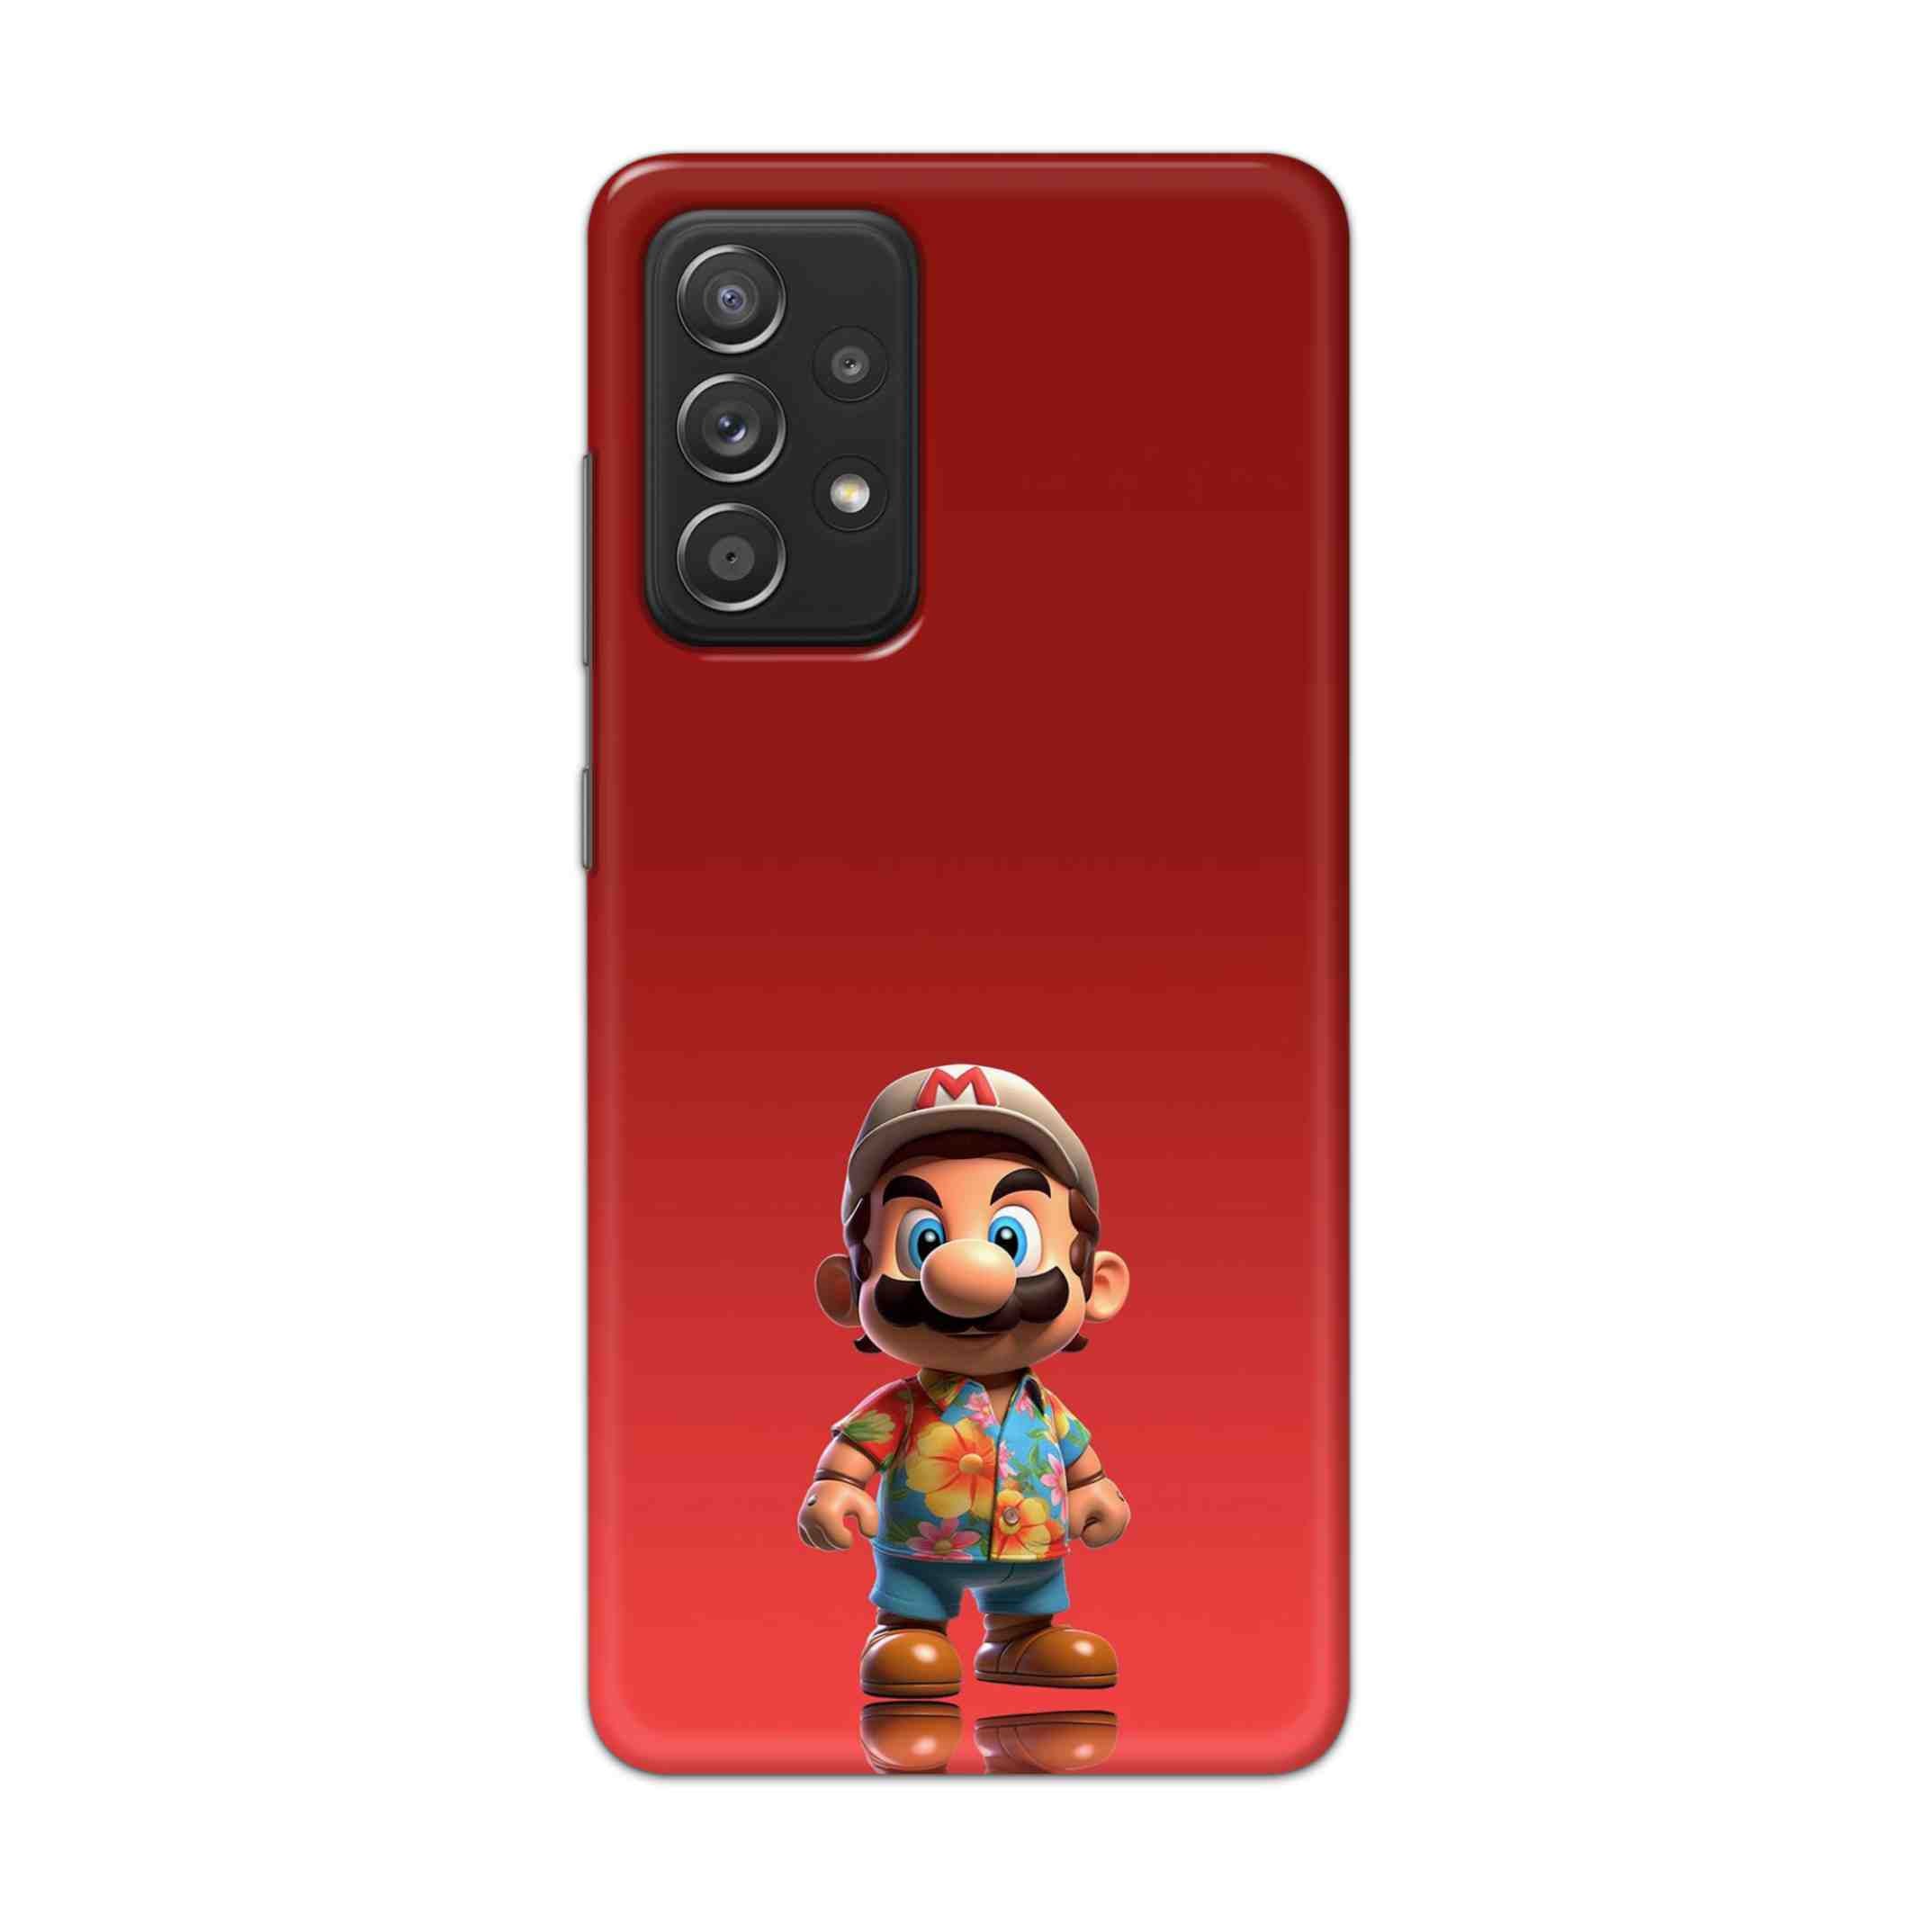 Buy Mario Hard Back Mobile Phone Case Cover For Samsung Galaxy A52 Online